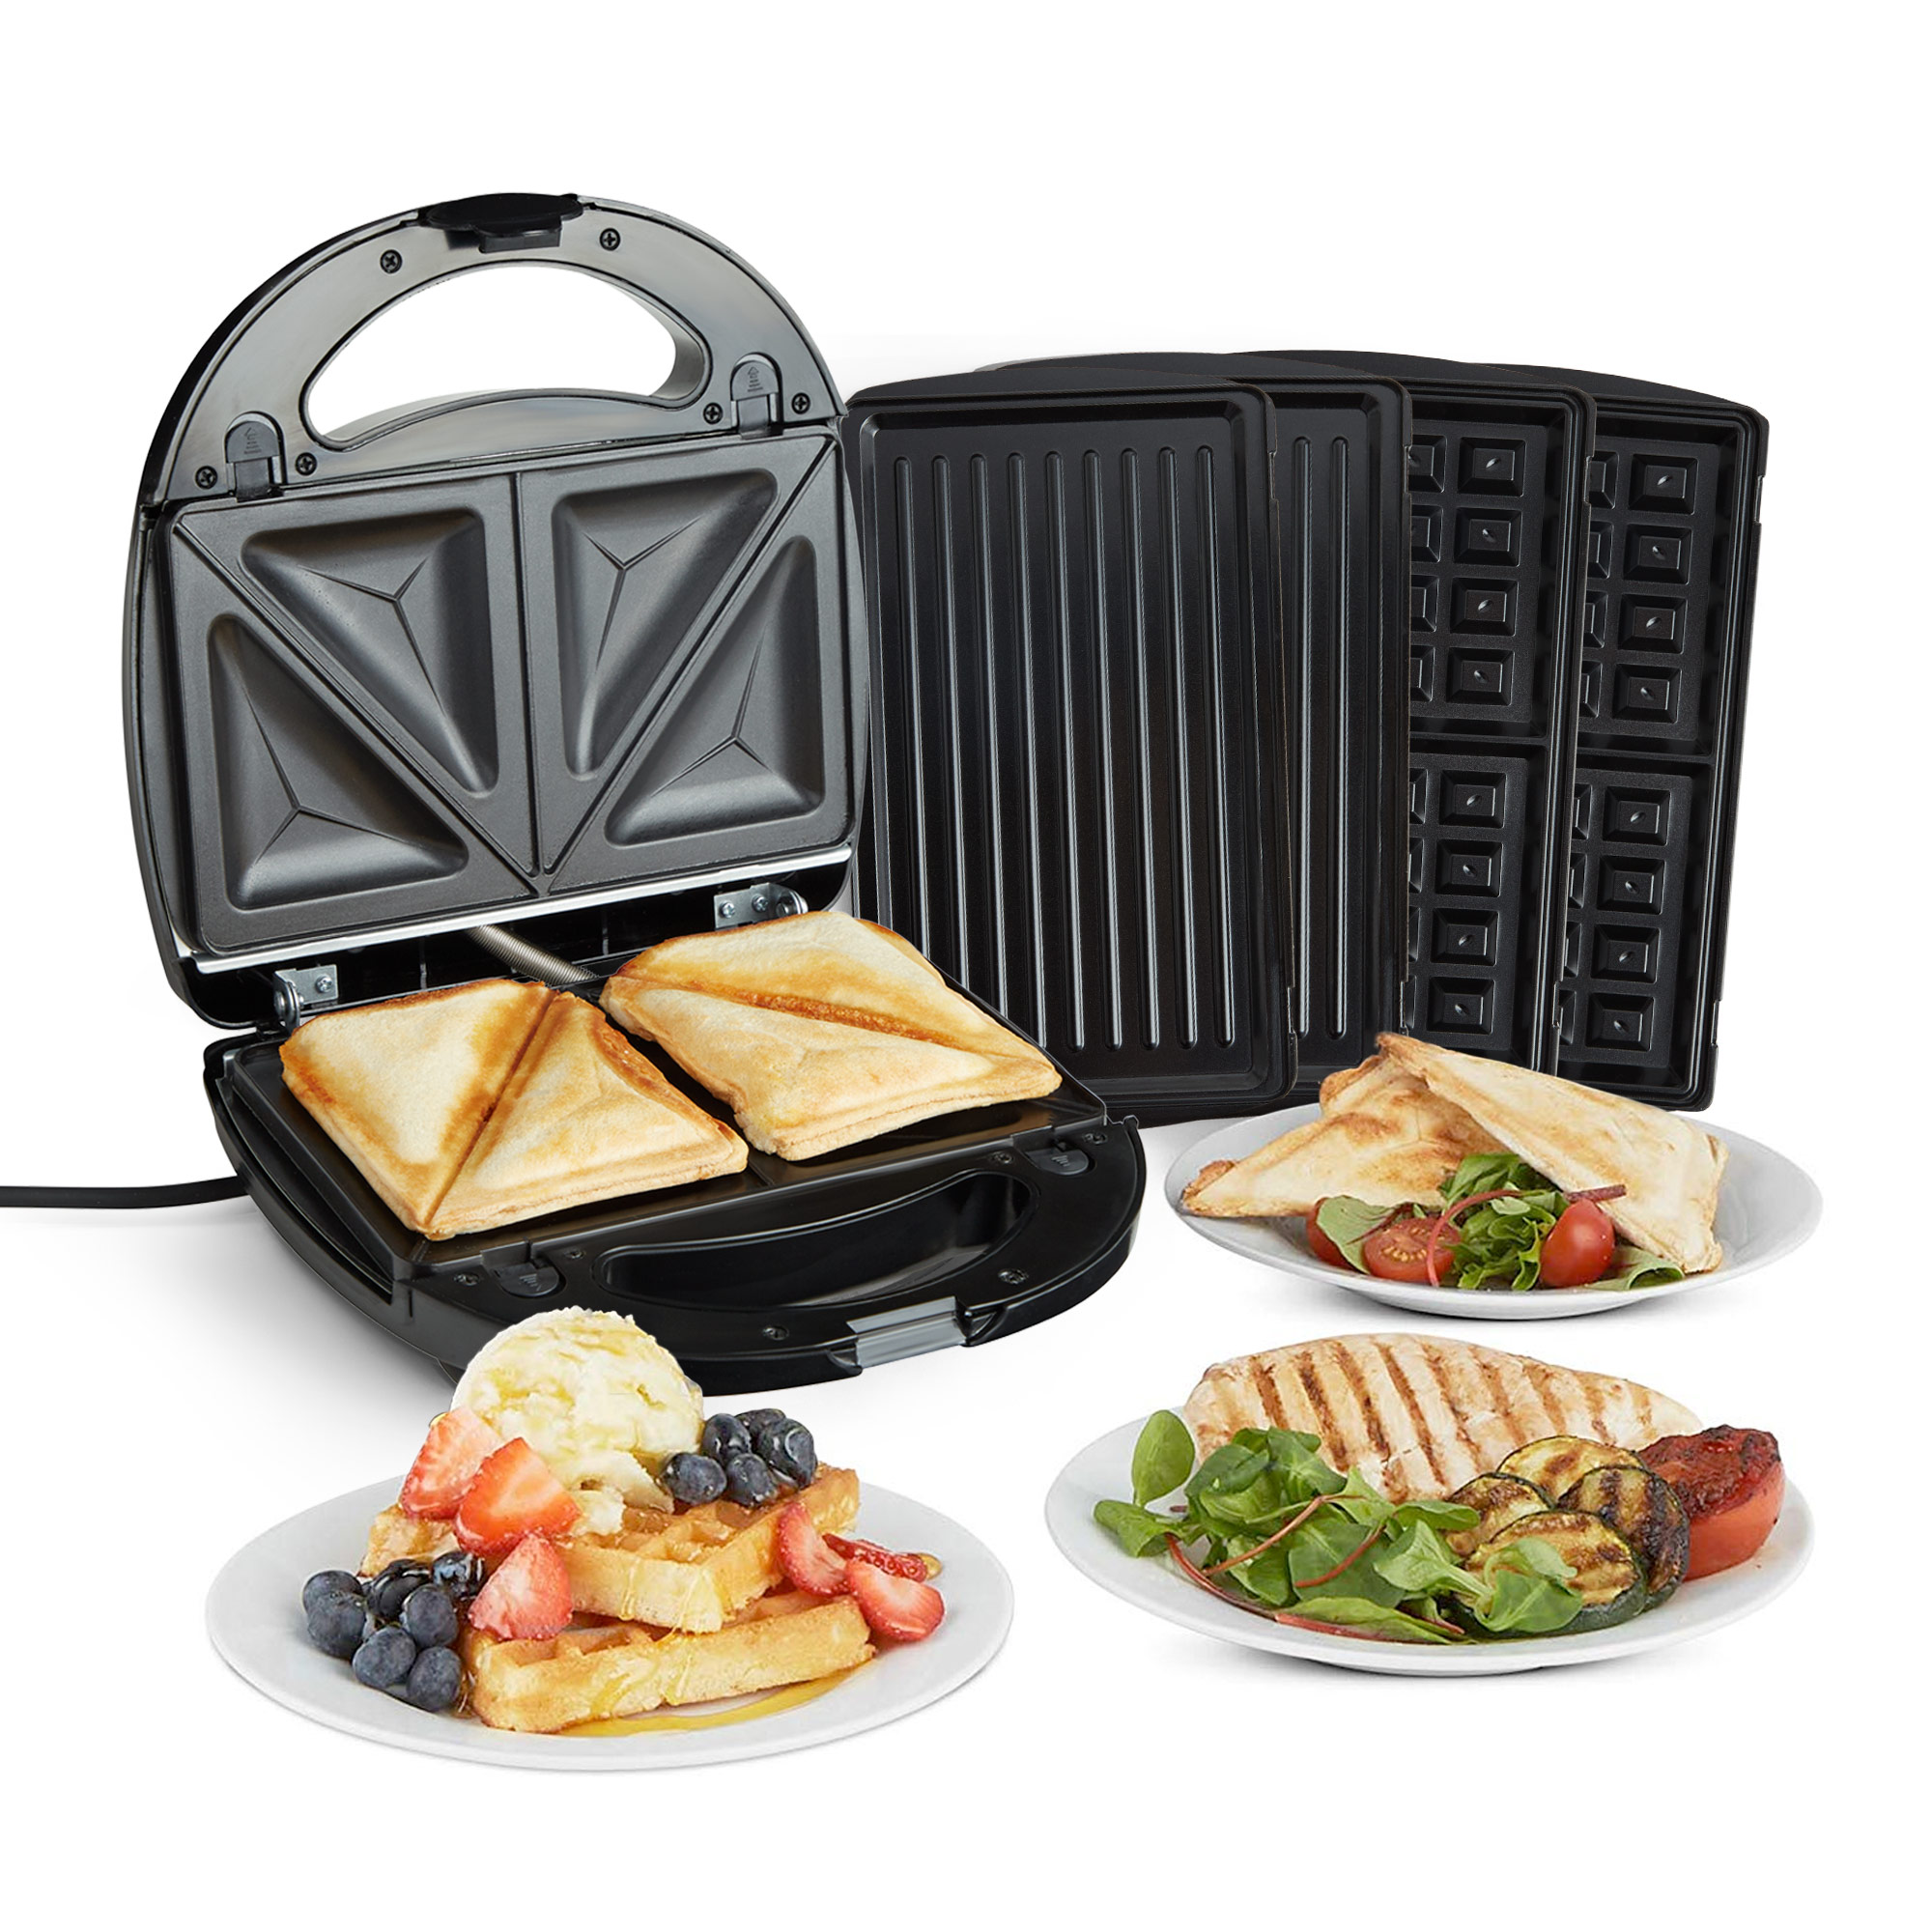 Toastie, Waffle & Panini Maker - VonShef 3 in 1 Snack Maker, Removable Plates